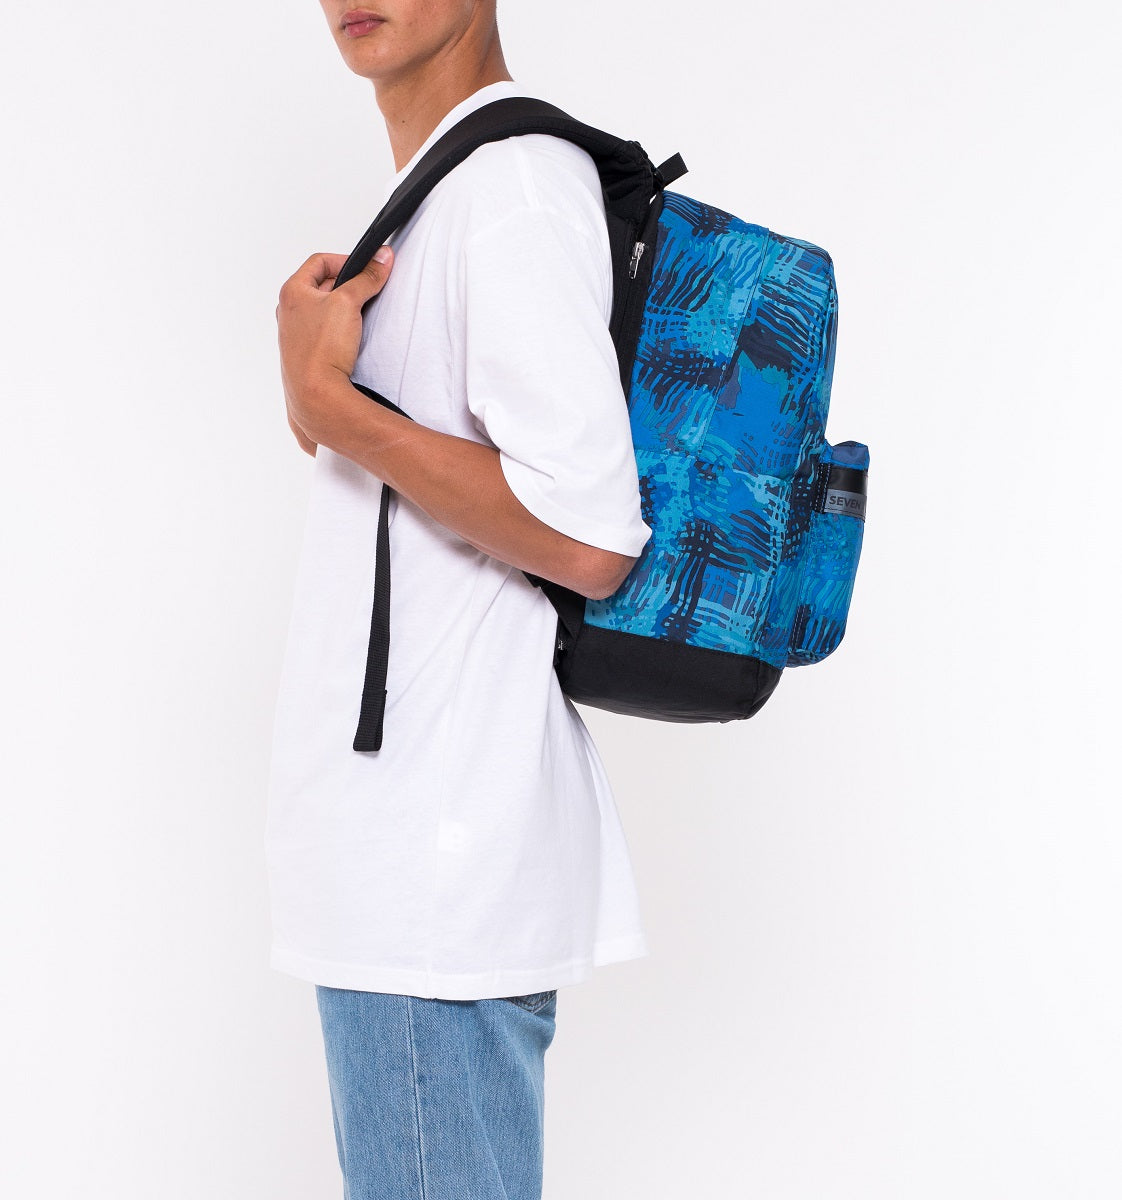 Seven® THE DOUBLE BACKPACK WITH EARPHONES WIRELESS - THE DOUBLE SPRAY